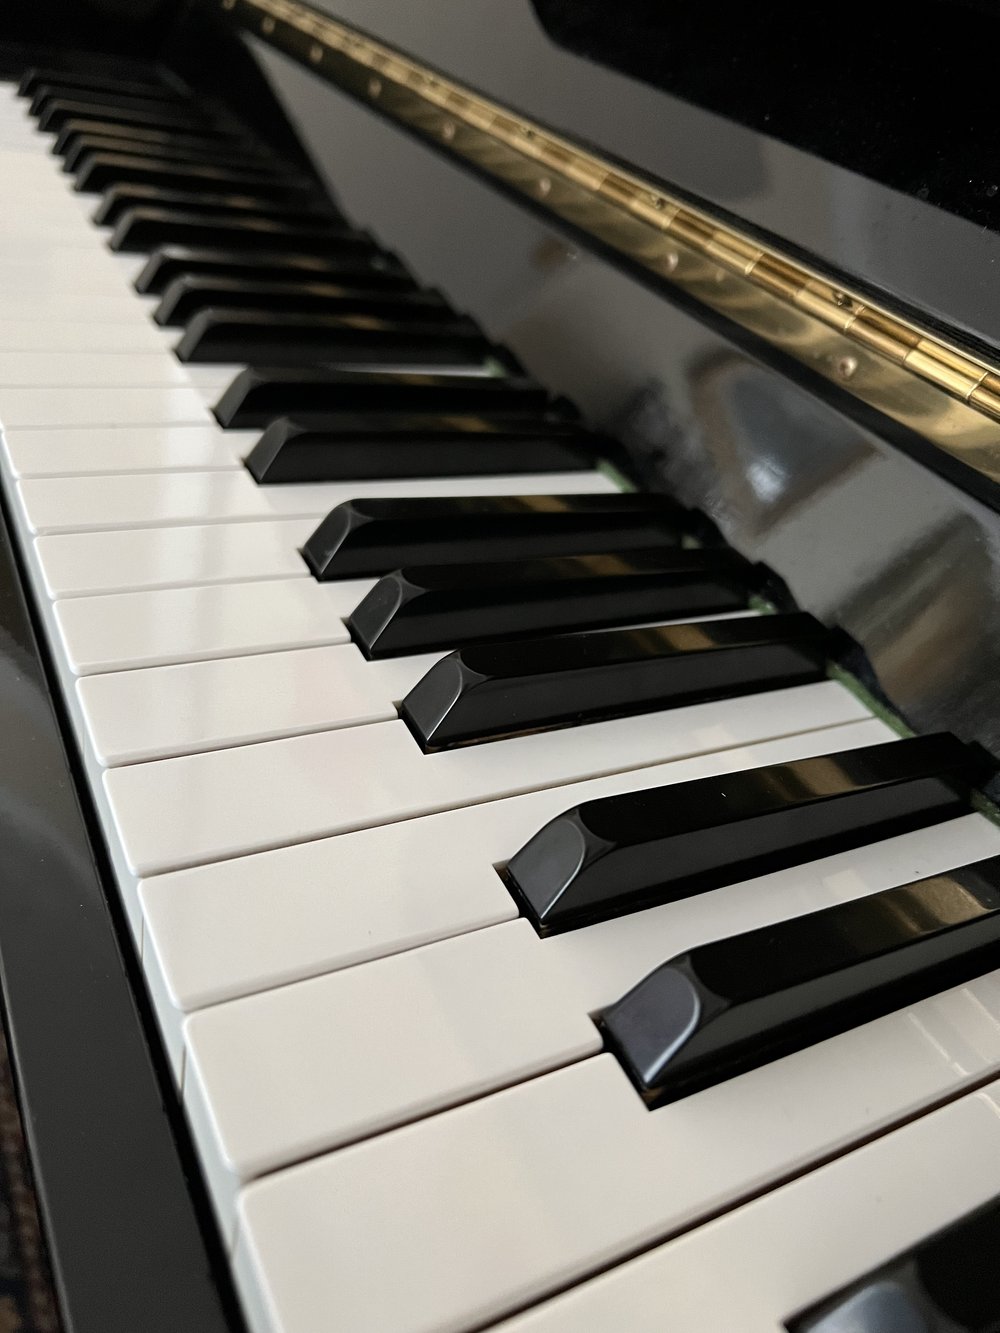 A close up of an electronic piano - Piano